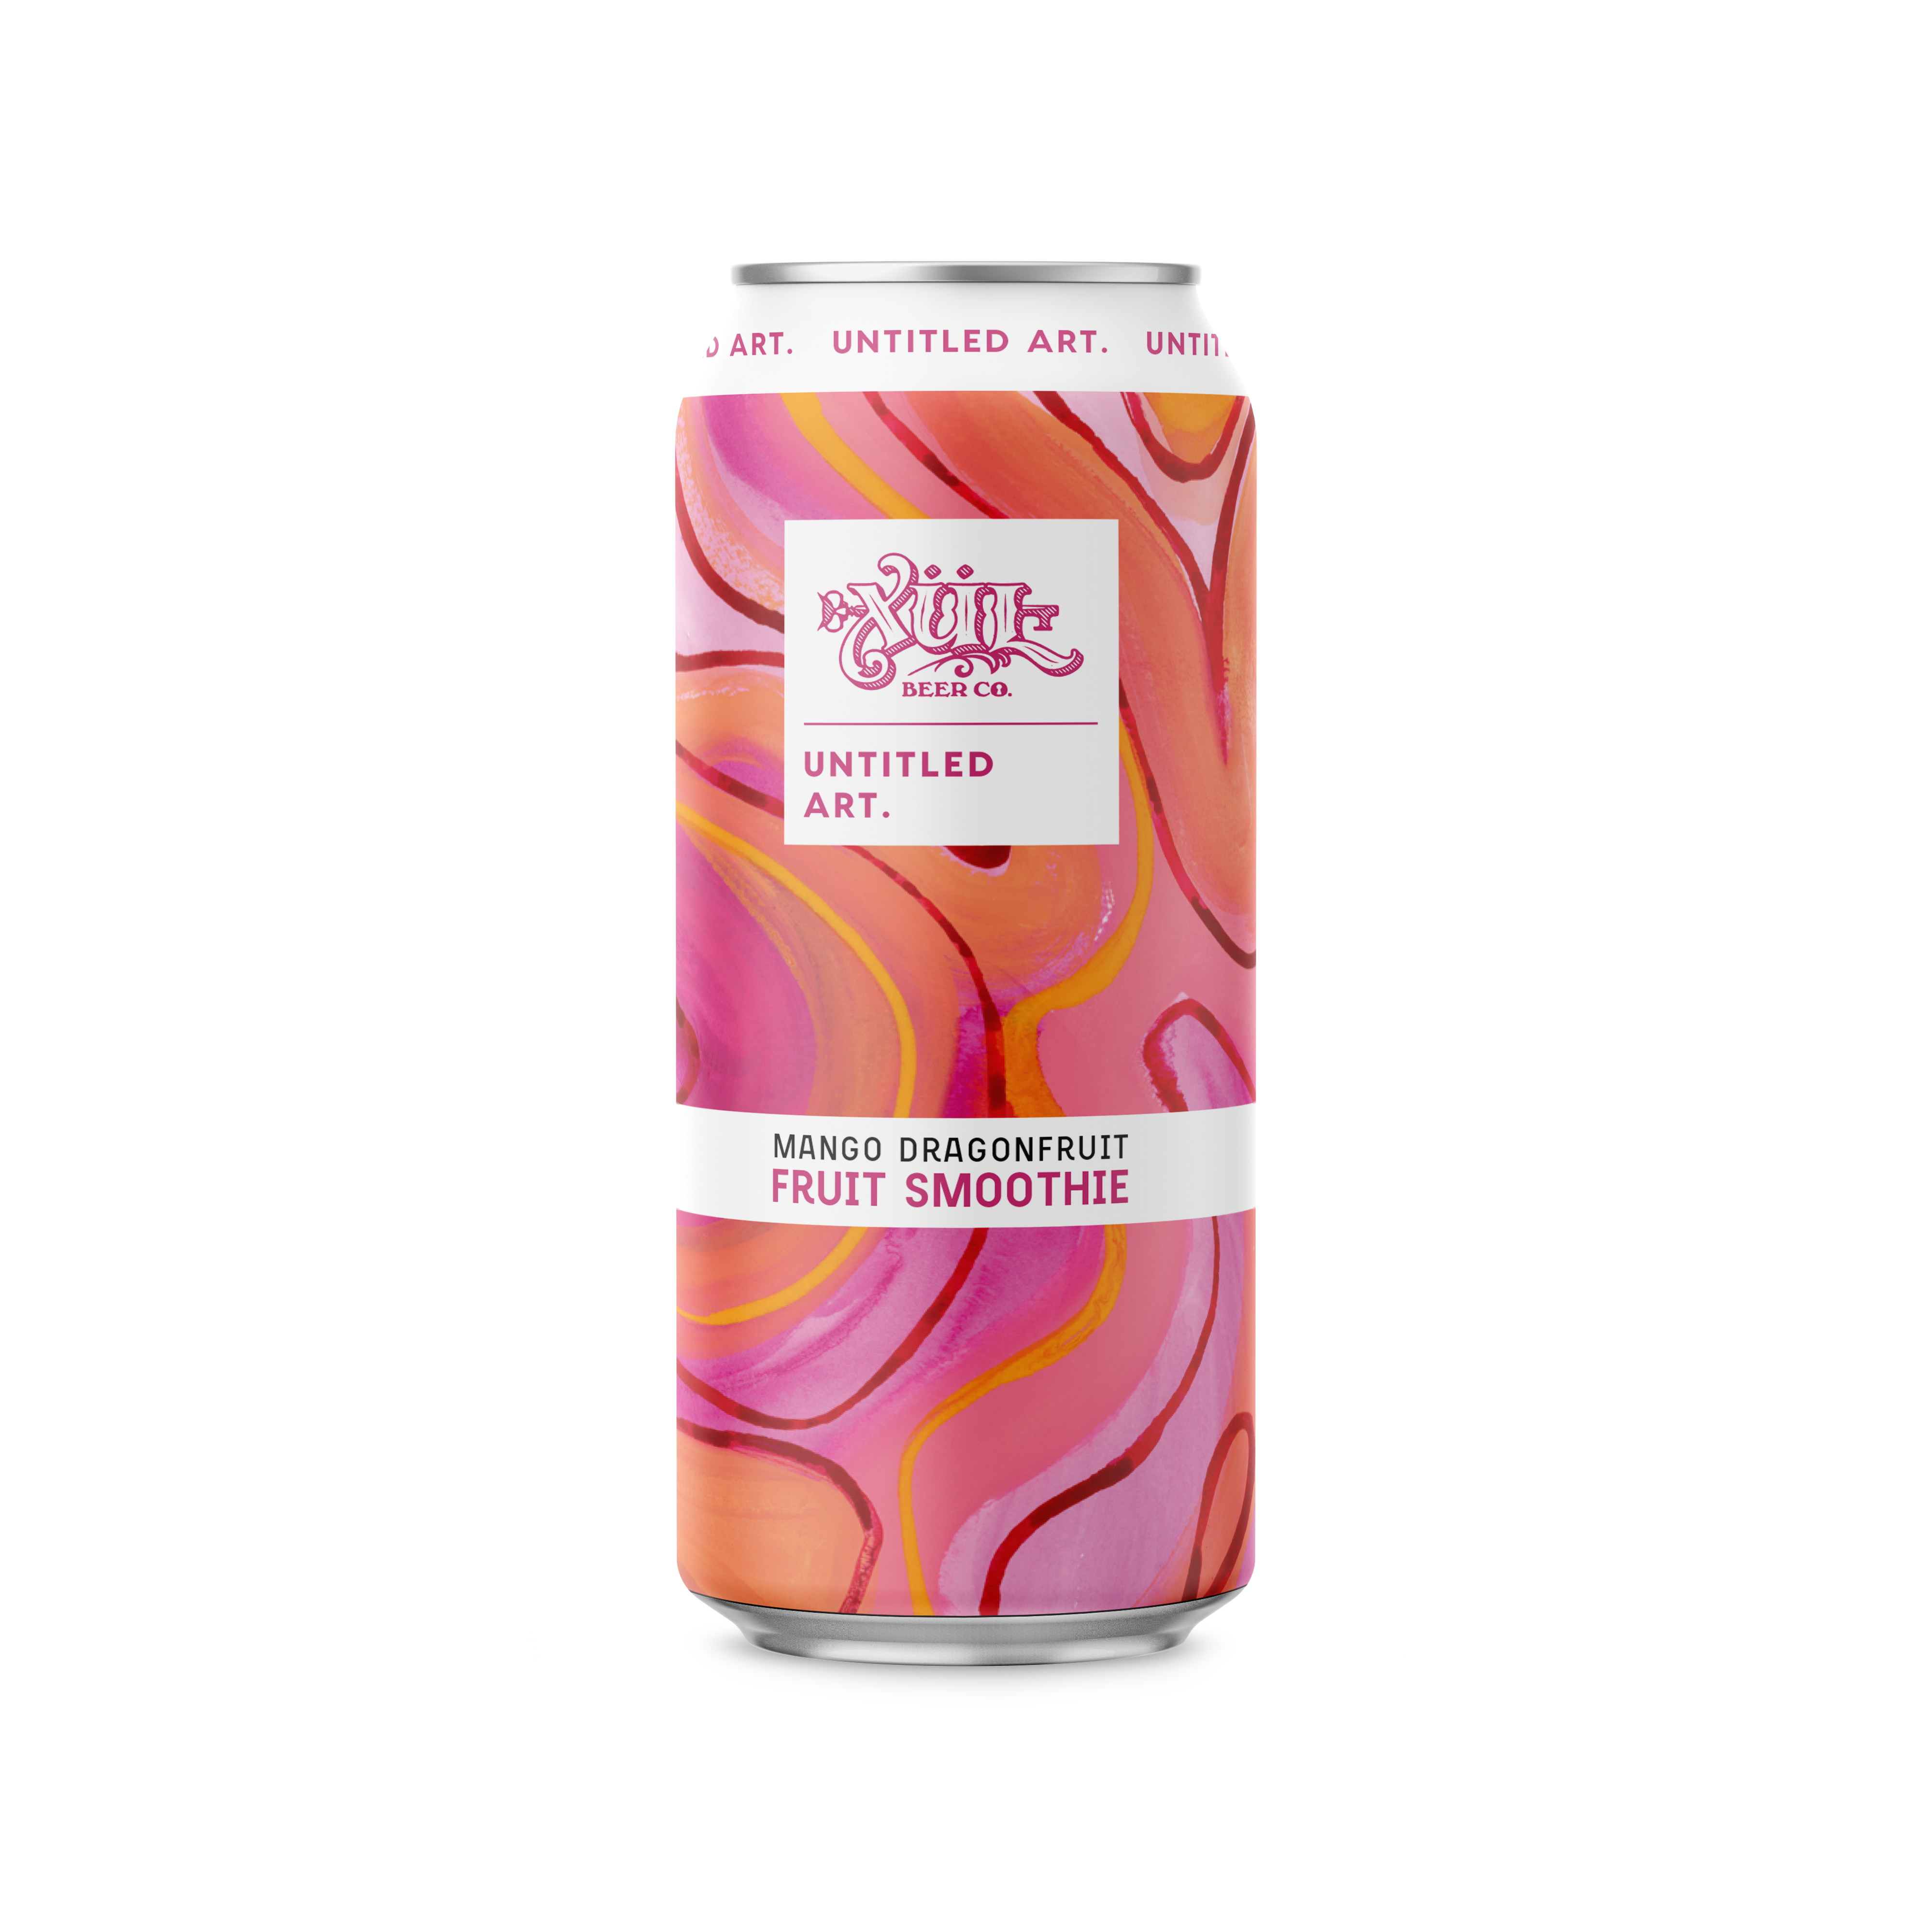 A can with a pink and white pattern on it.